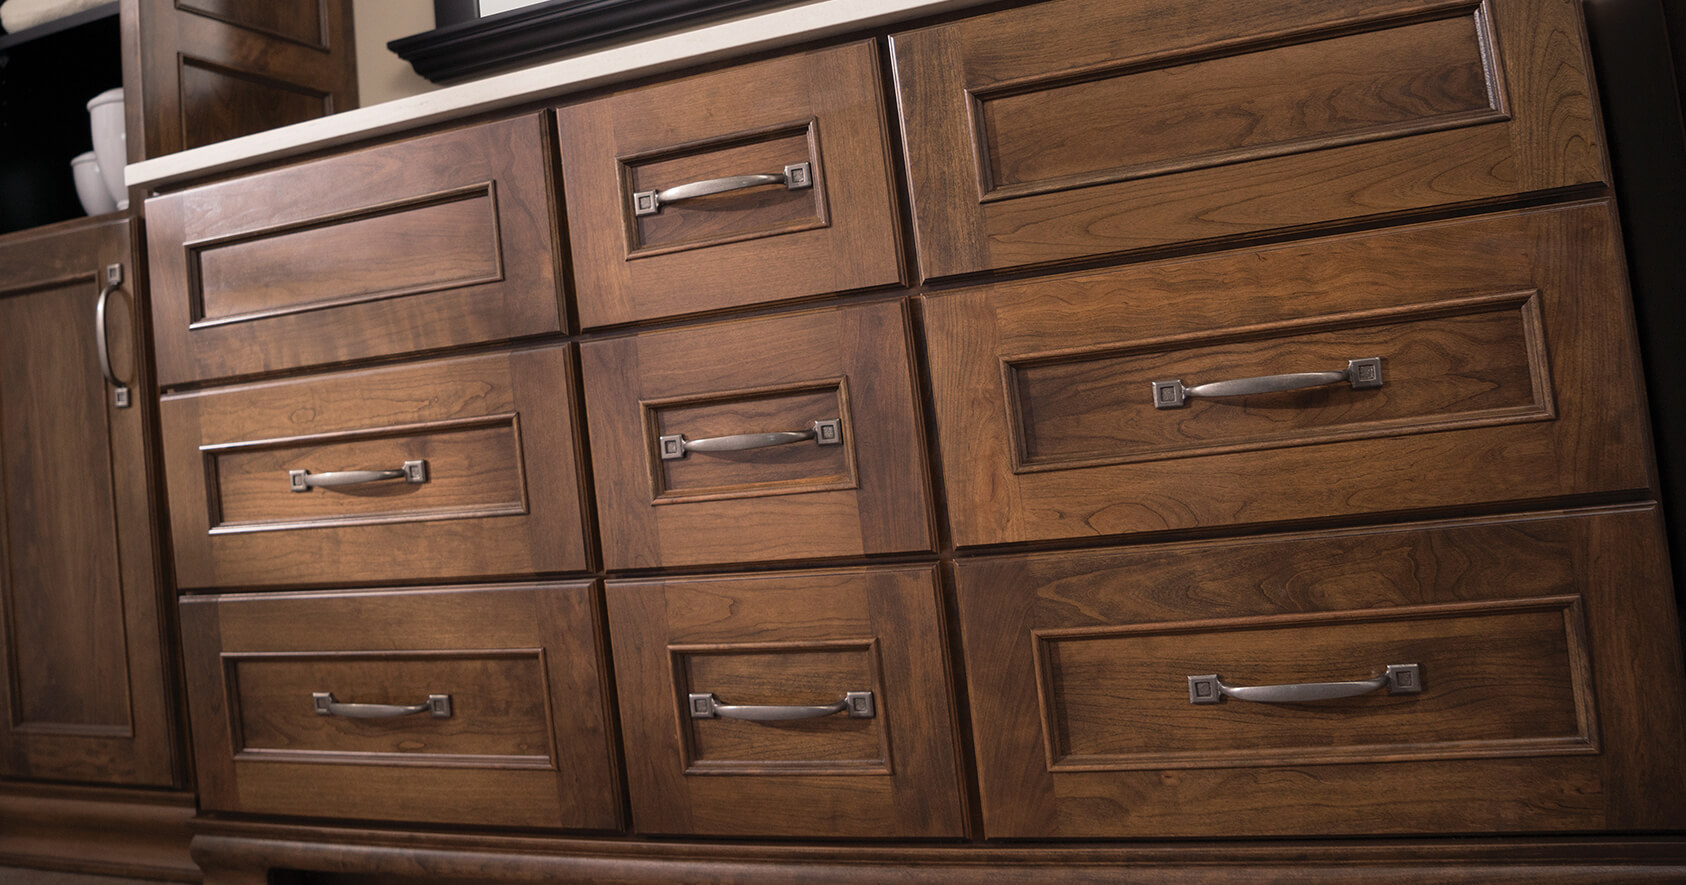 Sustainable hardwood products are used for Dura Supreme Cabinetry Kitchen and Bath Cabinets.